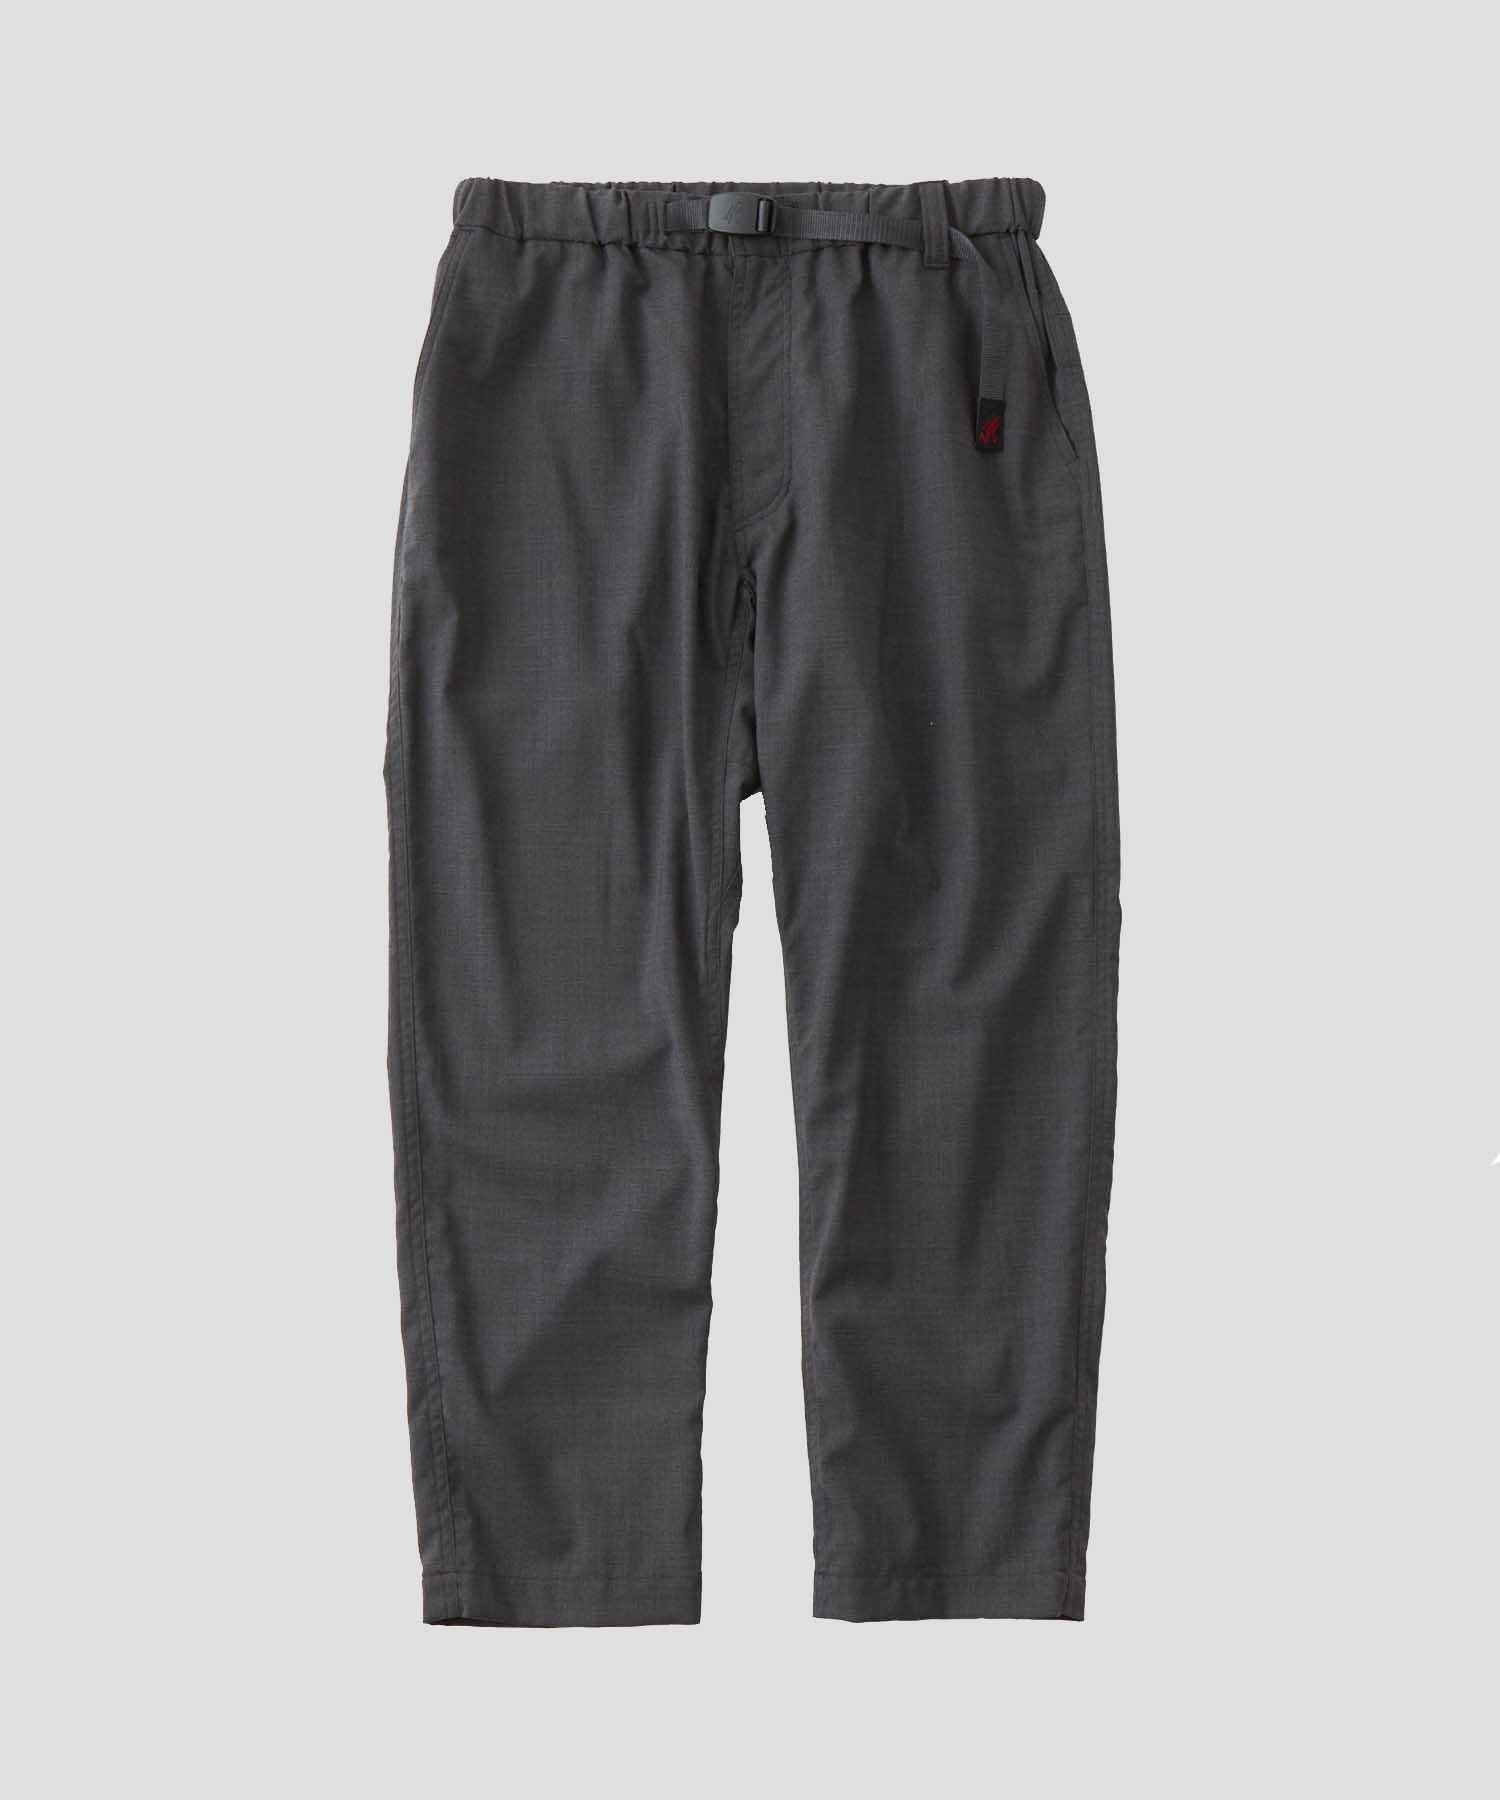 ×GRAMICCI TECH WOOLY TAPERED PANTS